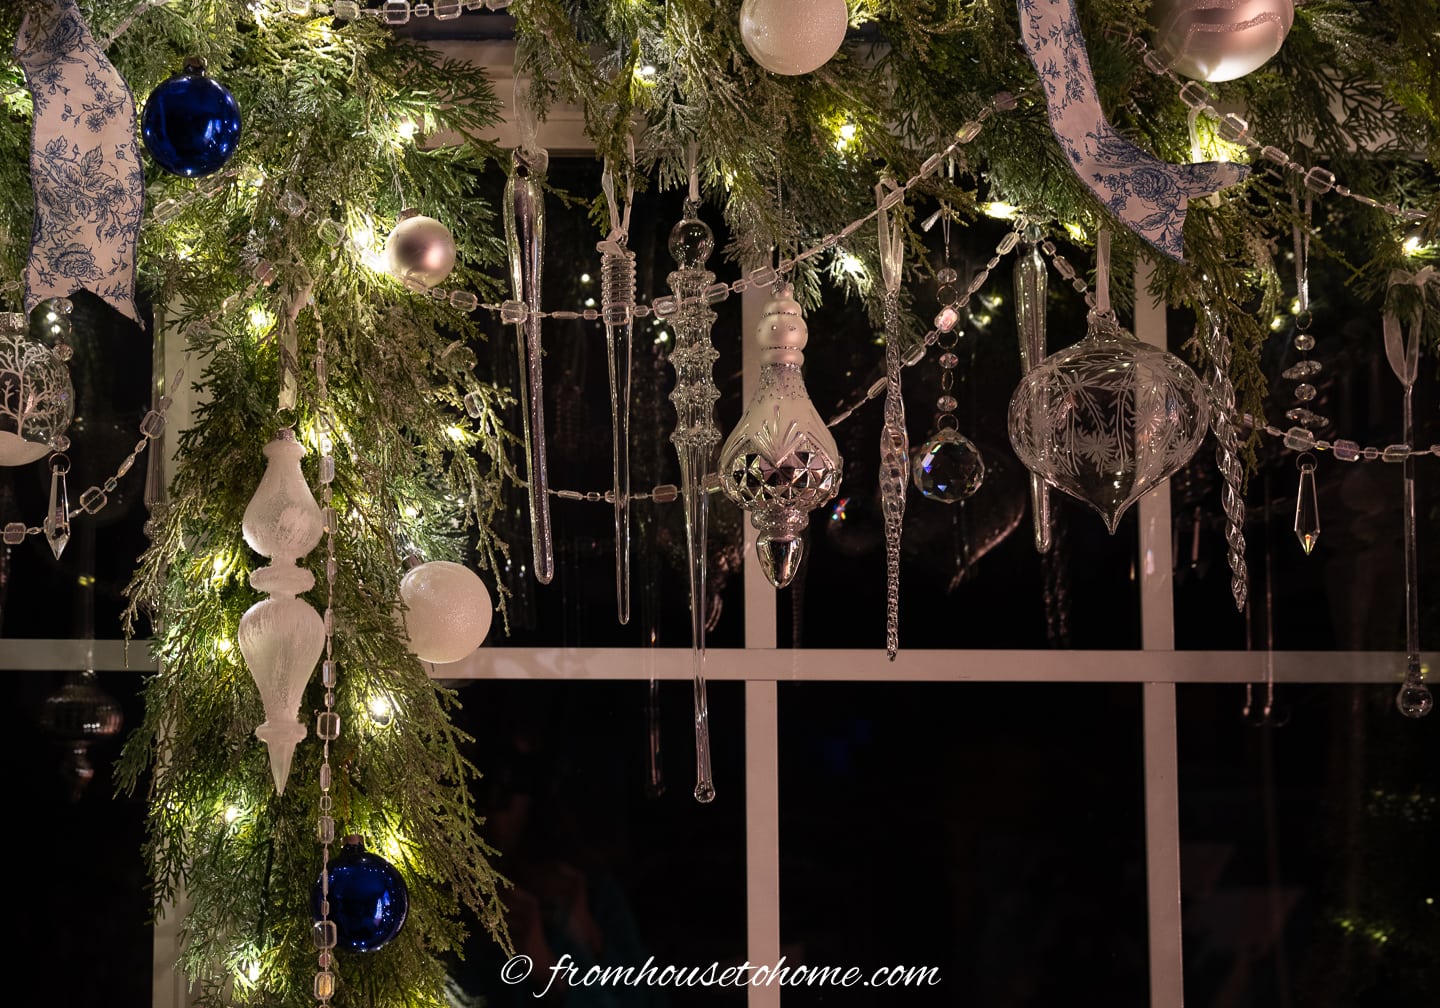 Clear glass ornaments hung over a garland with the lights on at night